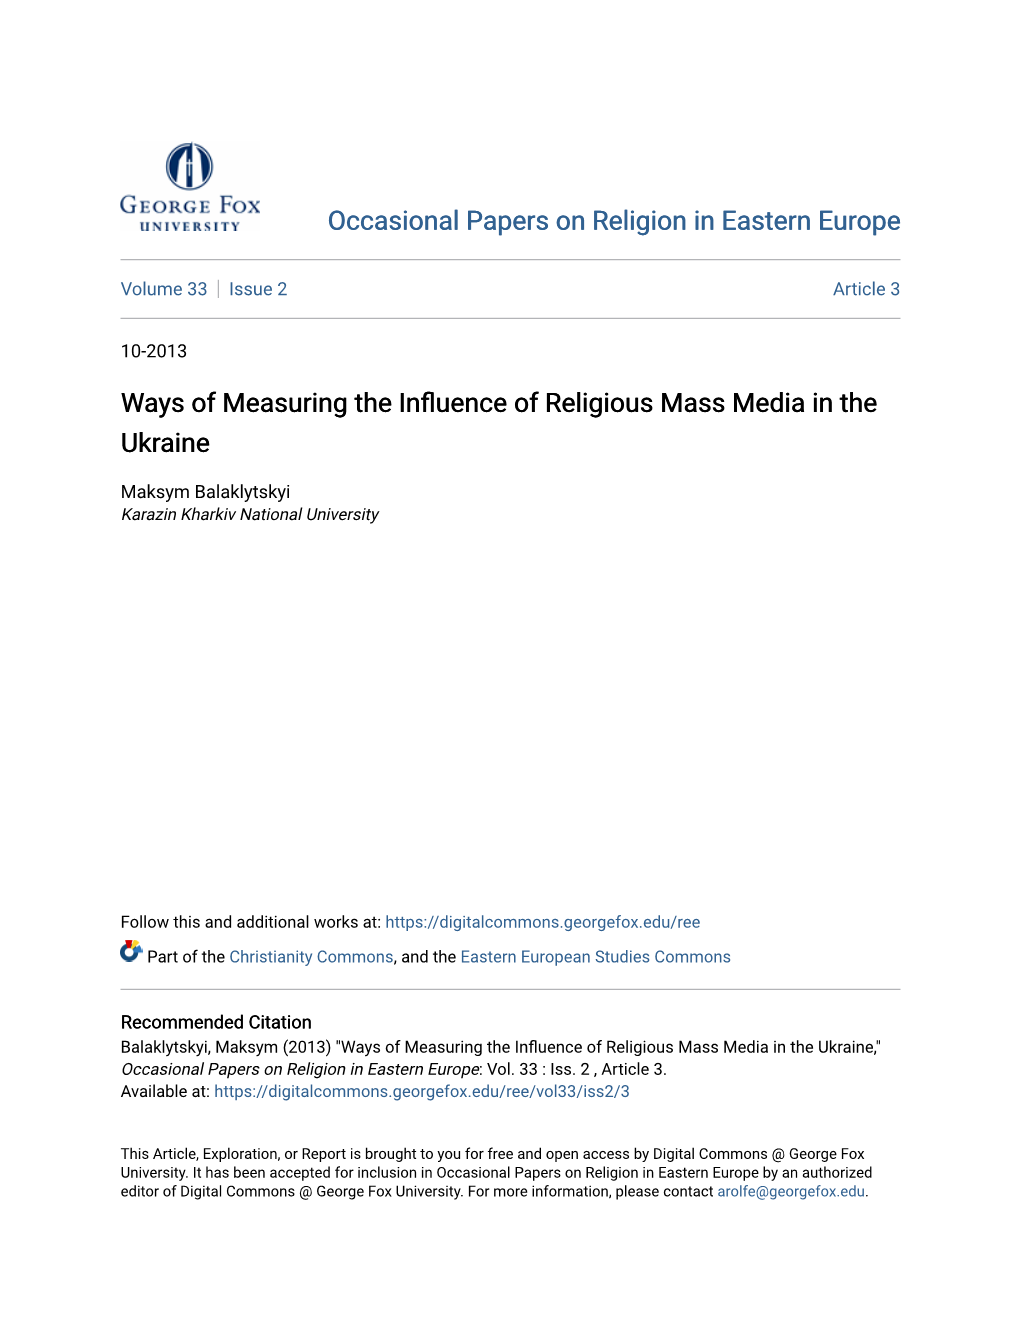 Ways of Measuring the Influence of Religious Mass Media in the Ukraine